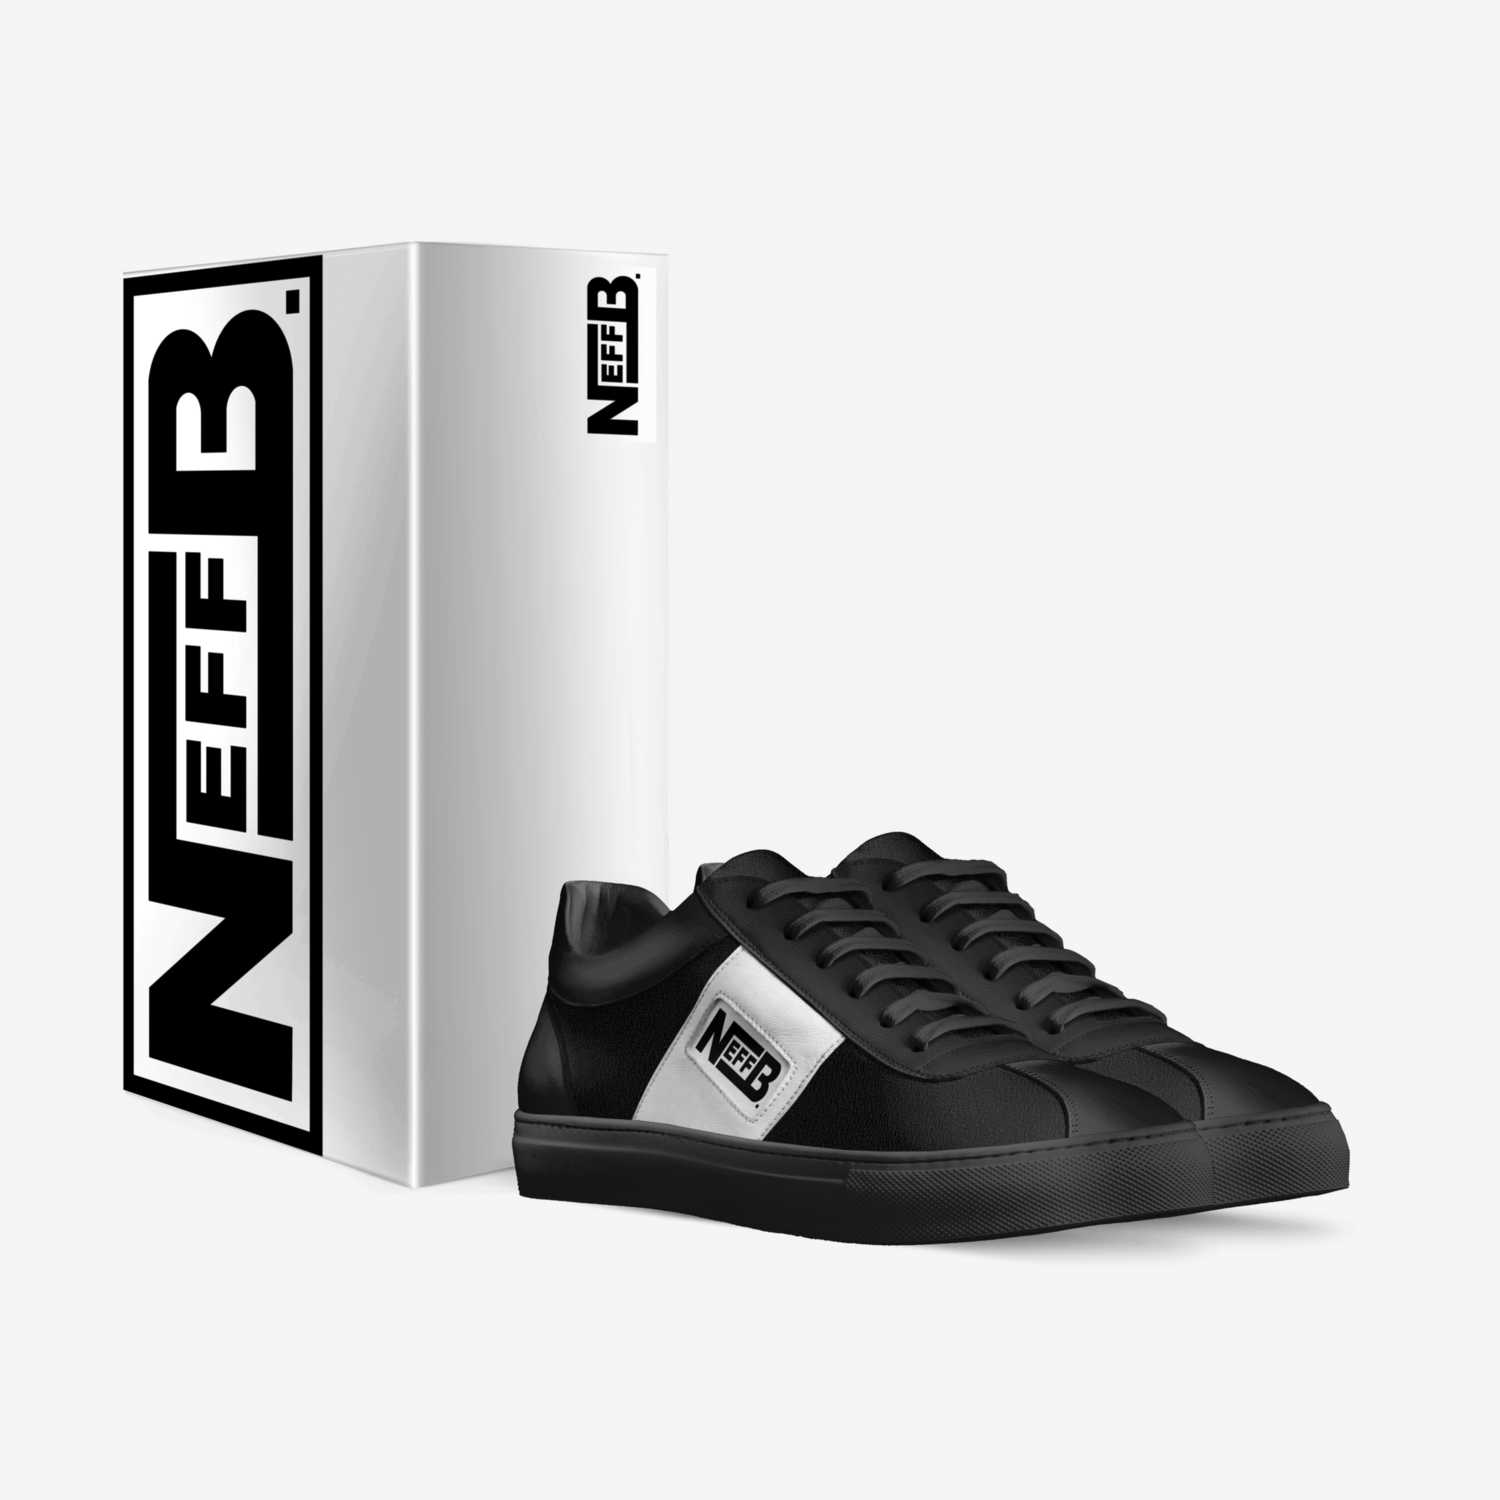 Neff B. custom made in Italy shoes by Neff B. | Box view